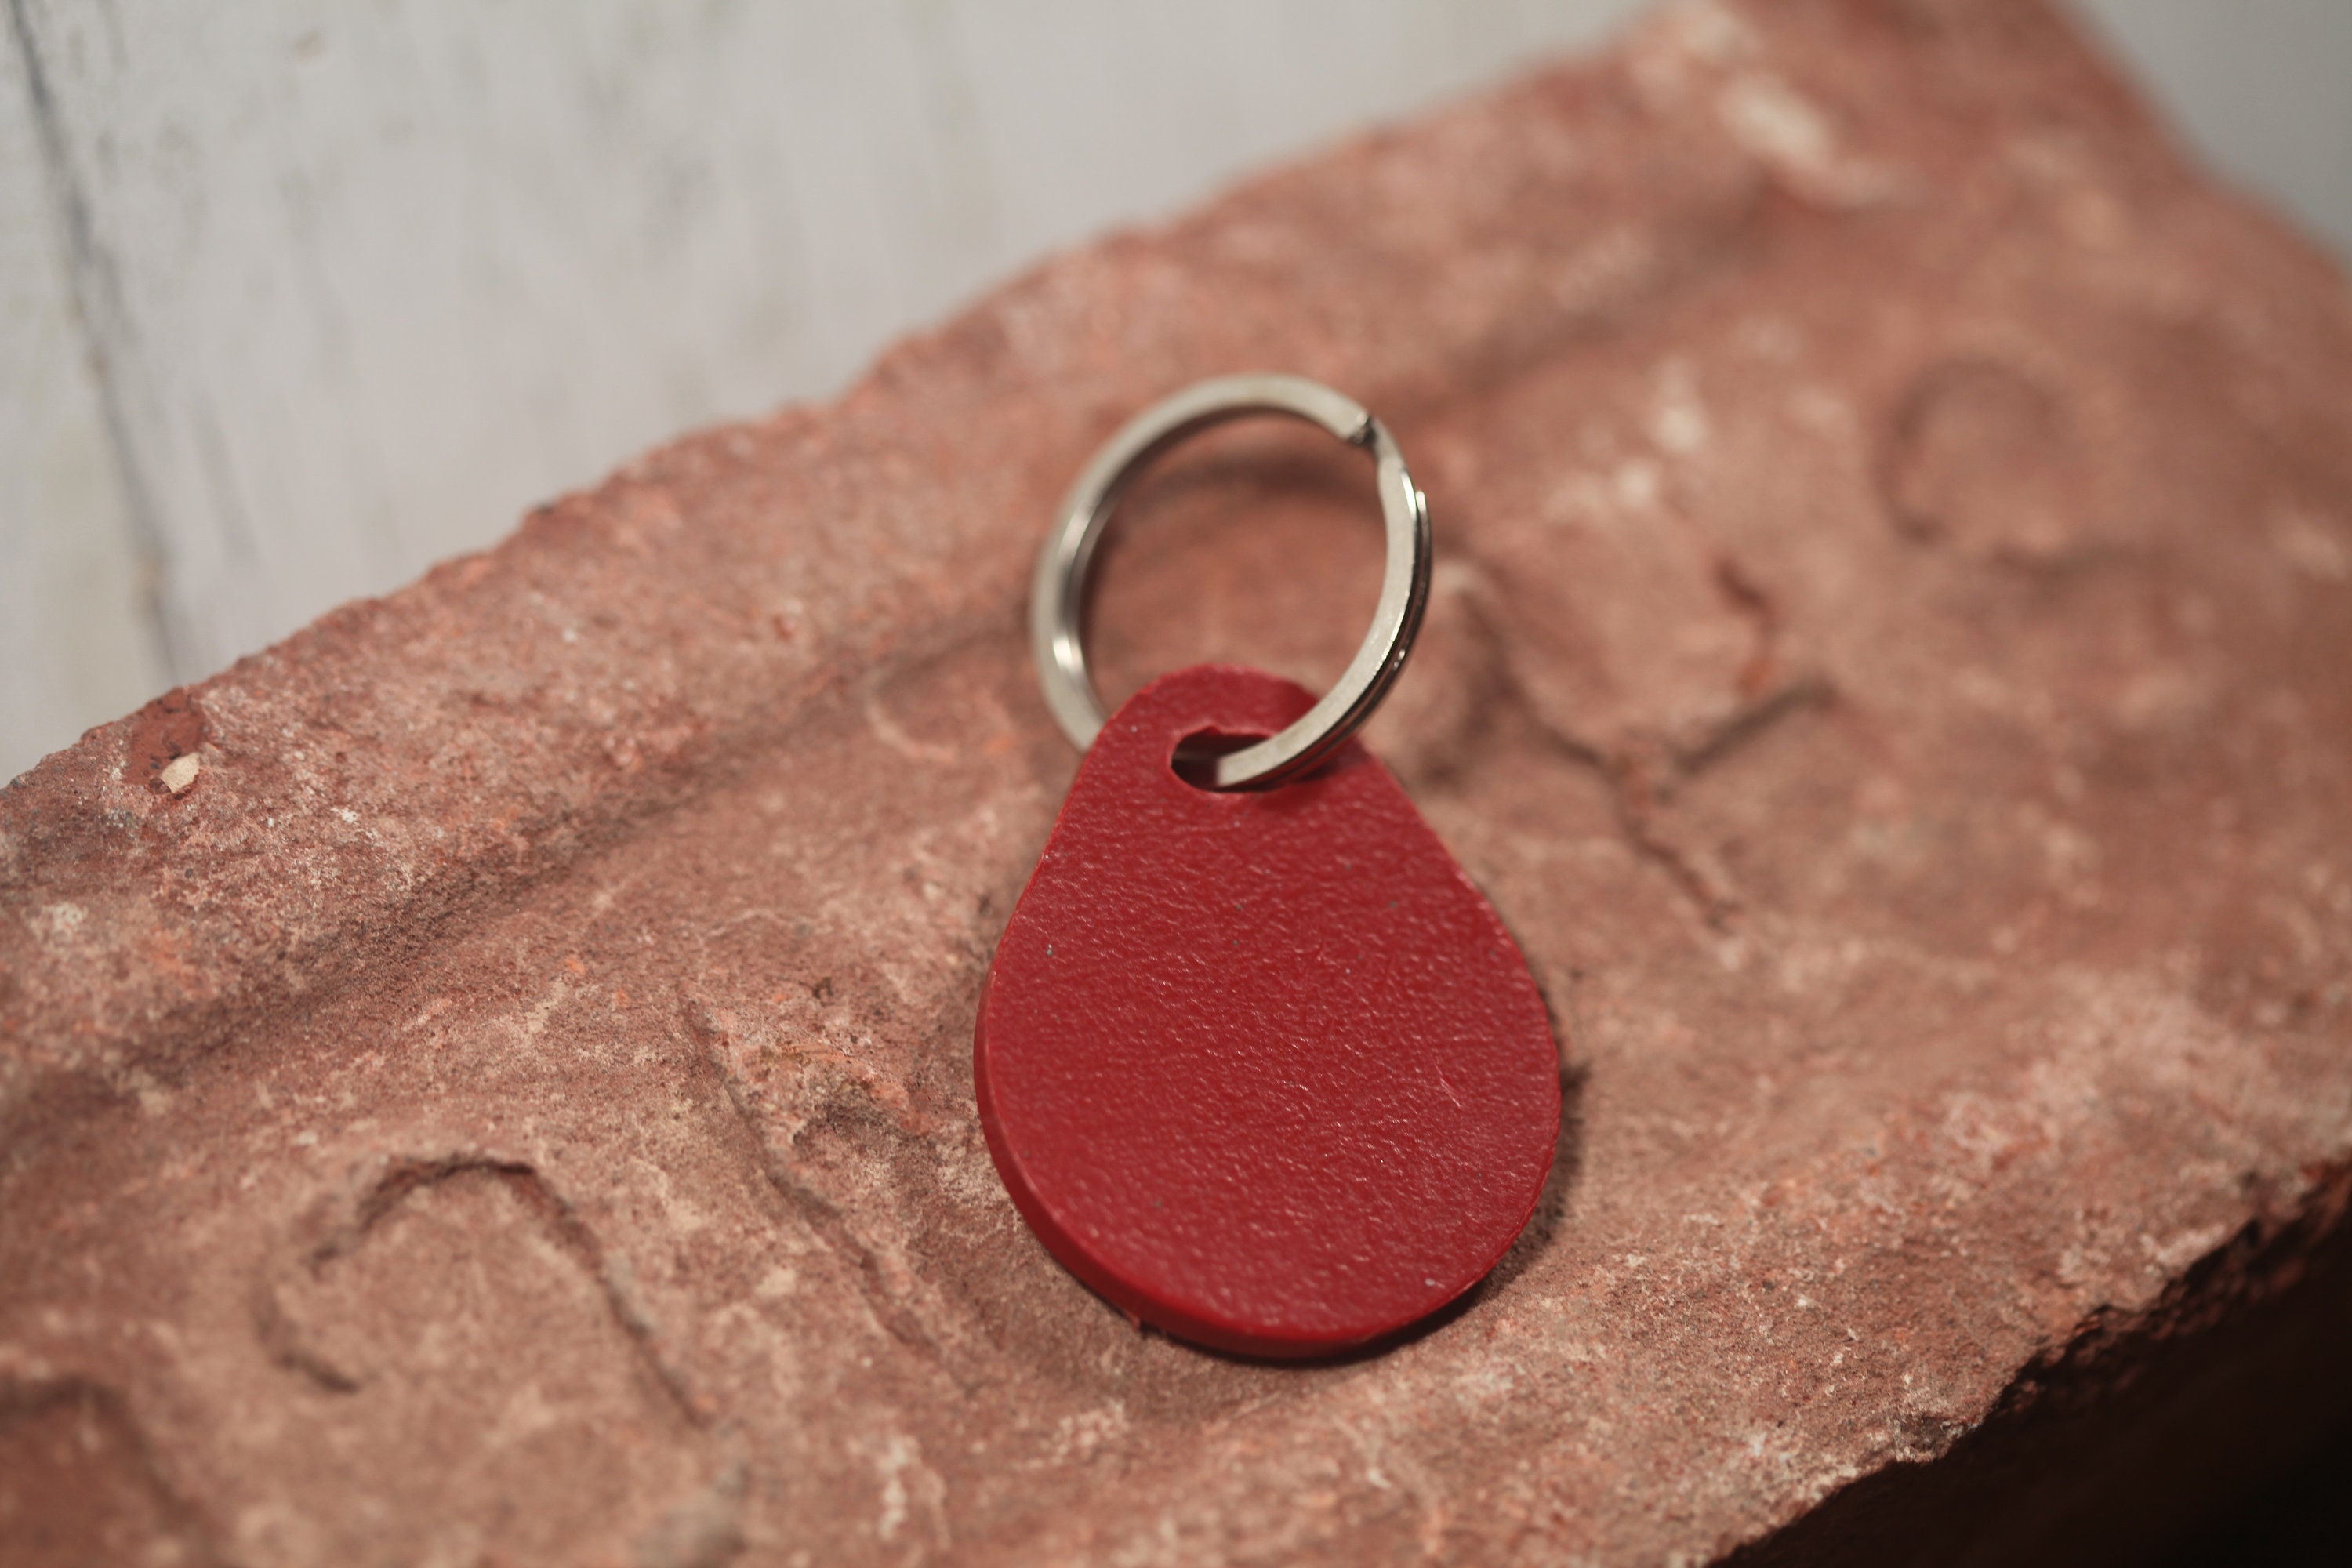 Duvall Leatherwork Small Leather Key Fob Red